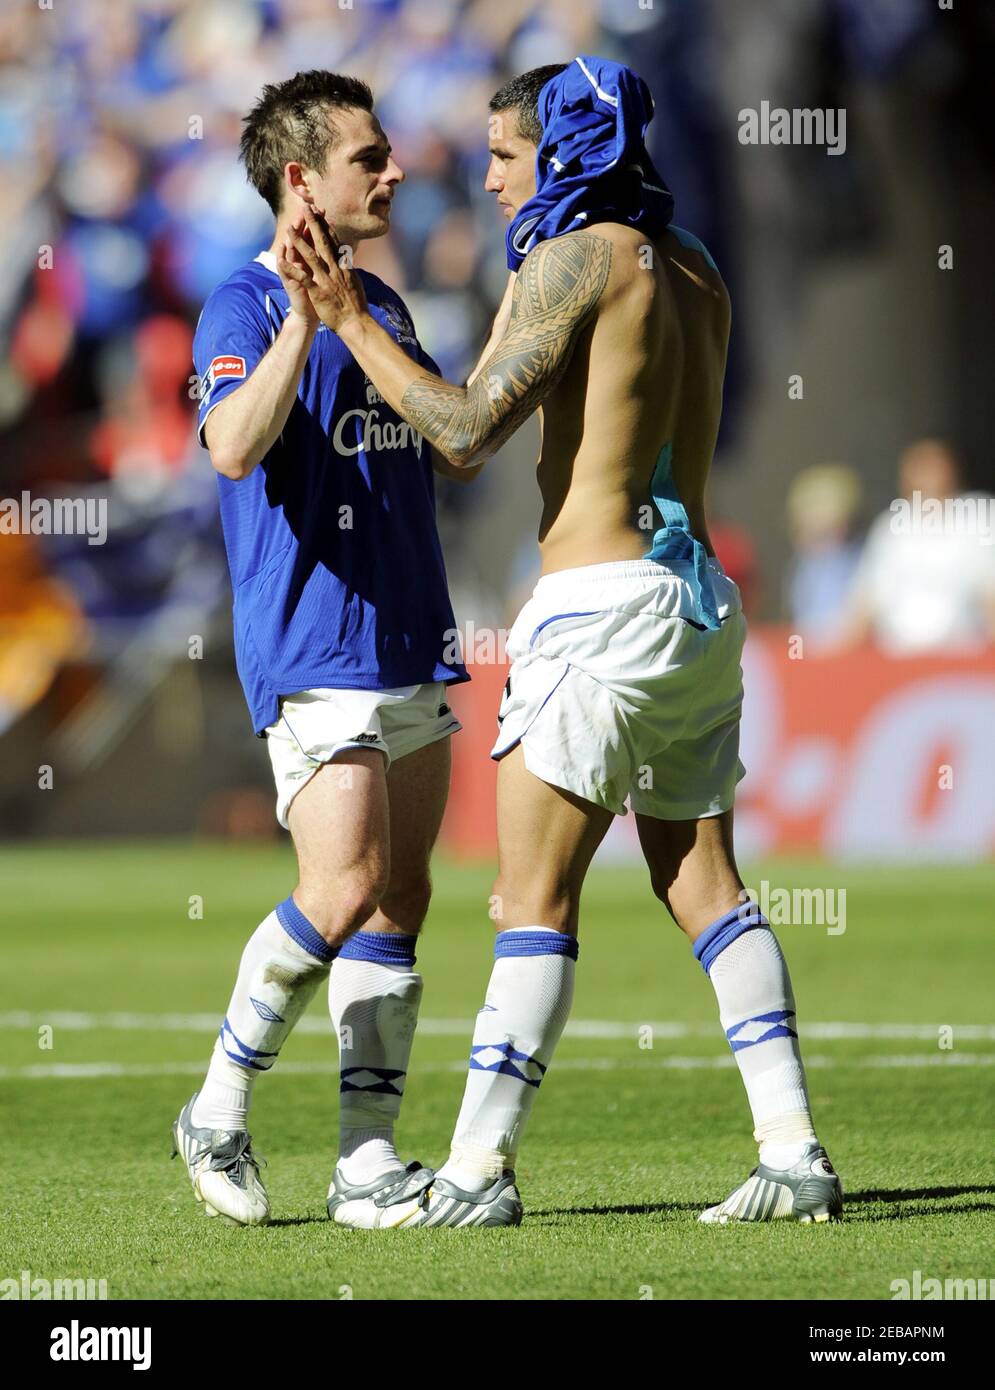 football-chelsea-v-everton-fa-cup-final-wembley-stadium-0809-30509-evertons-leighton-baines-and-tim-cahill-r-dejected-at-the-end-mandatory-credit-action-images-tony-obrien-2EBAPNM.jpg